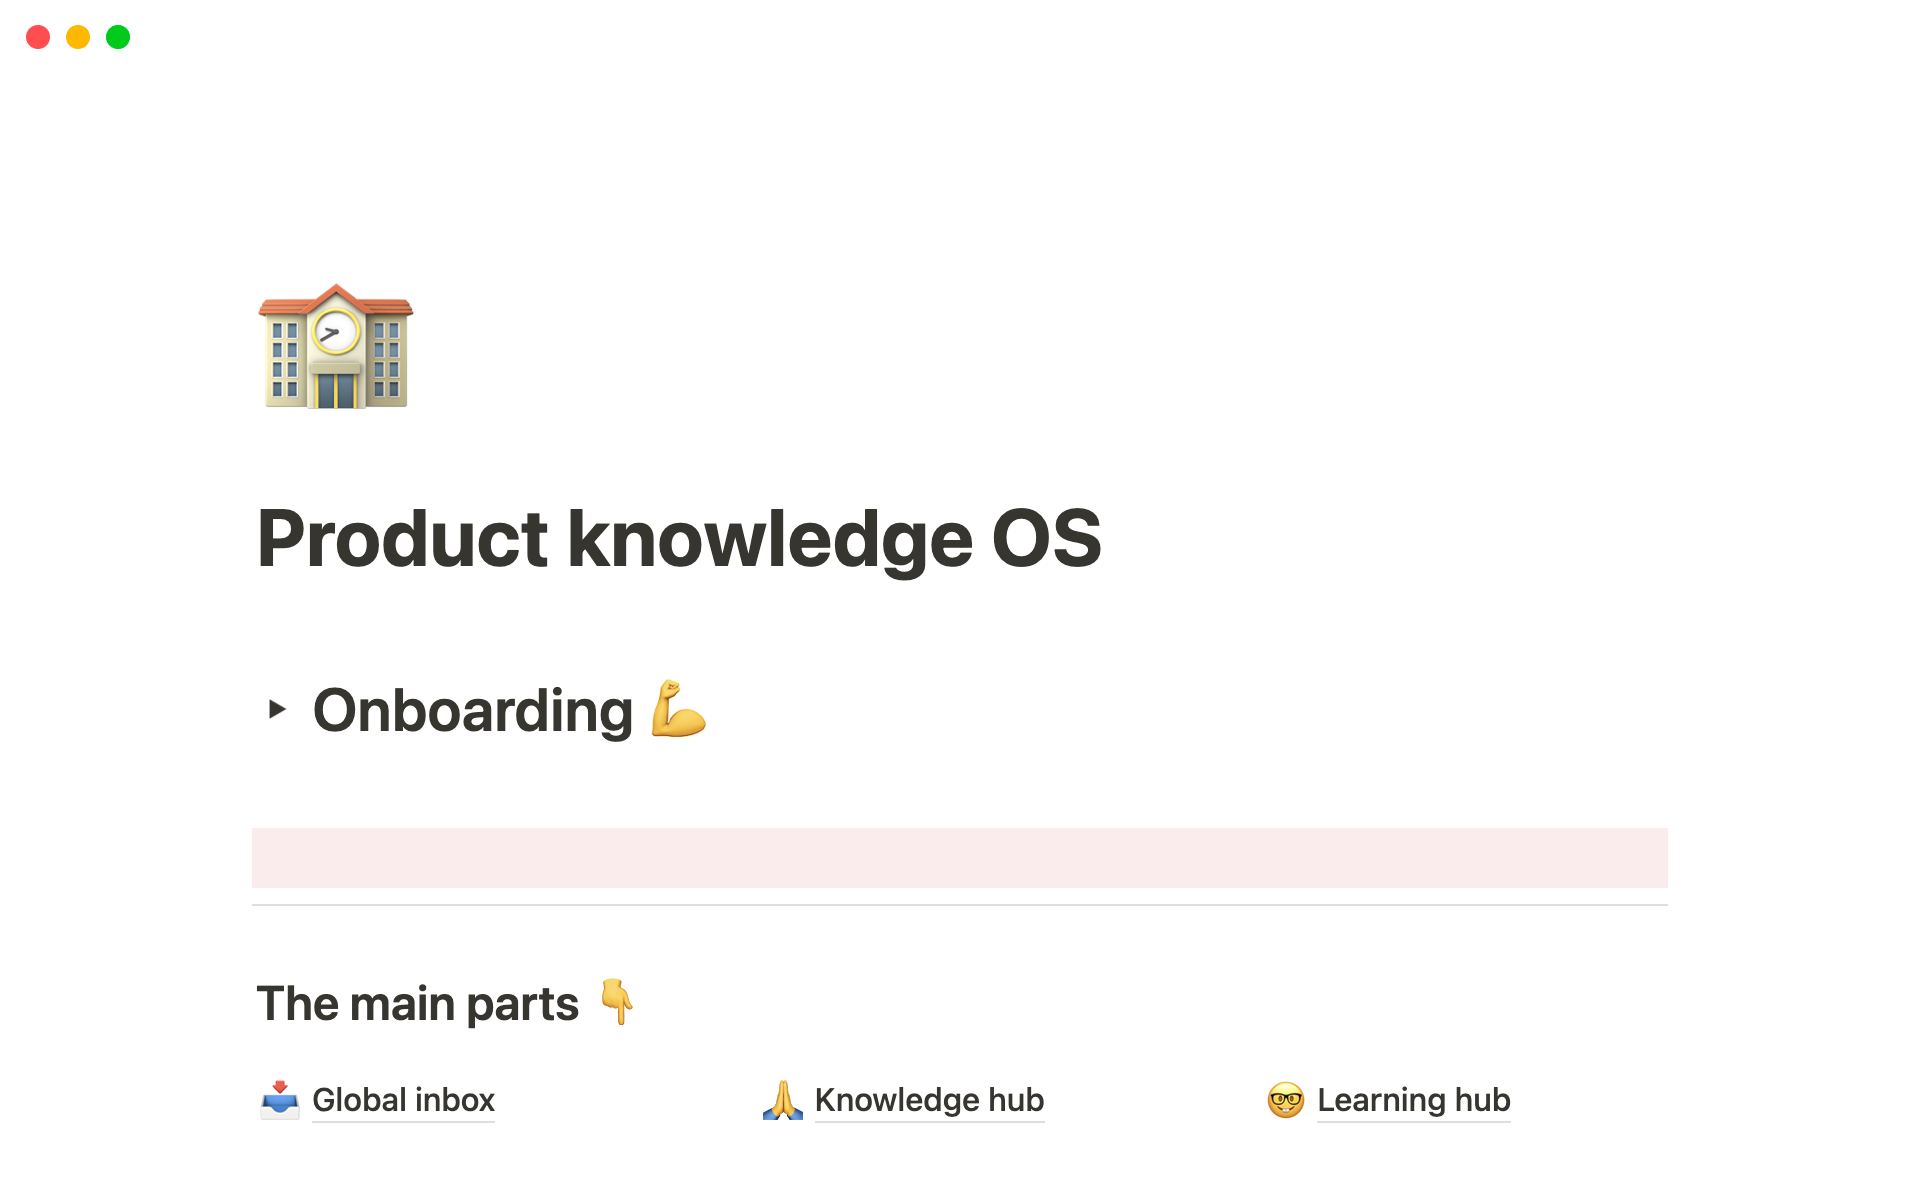 Product knowledge OS enables you to gather everything you ever learned about product development.